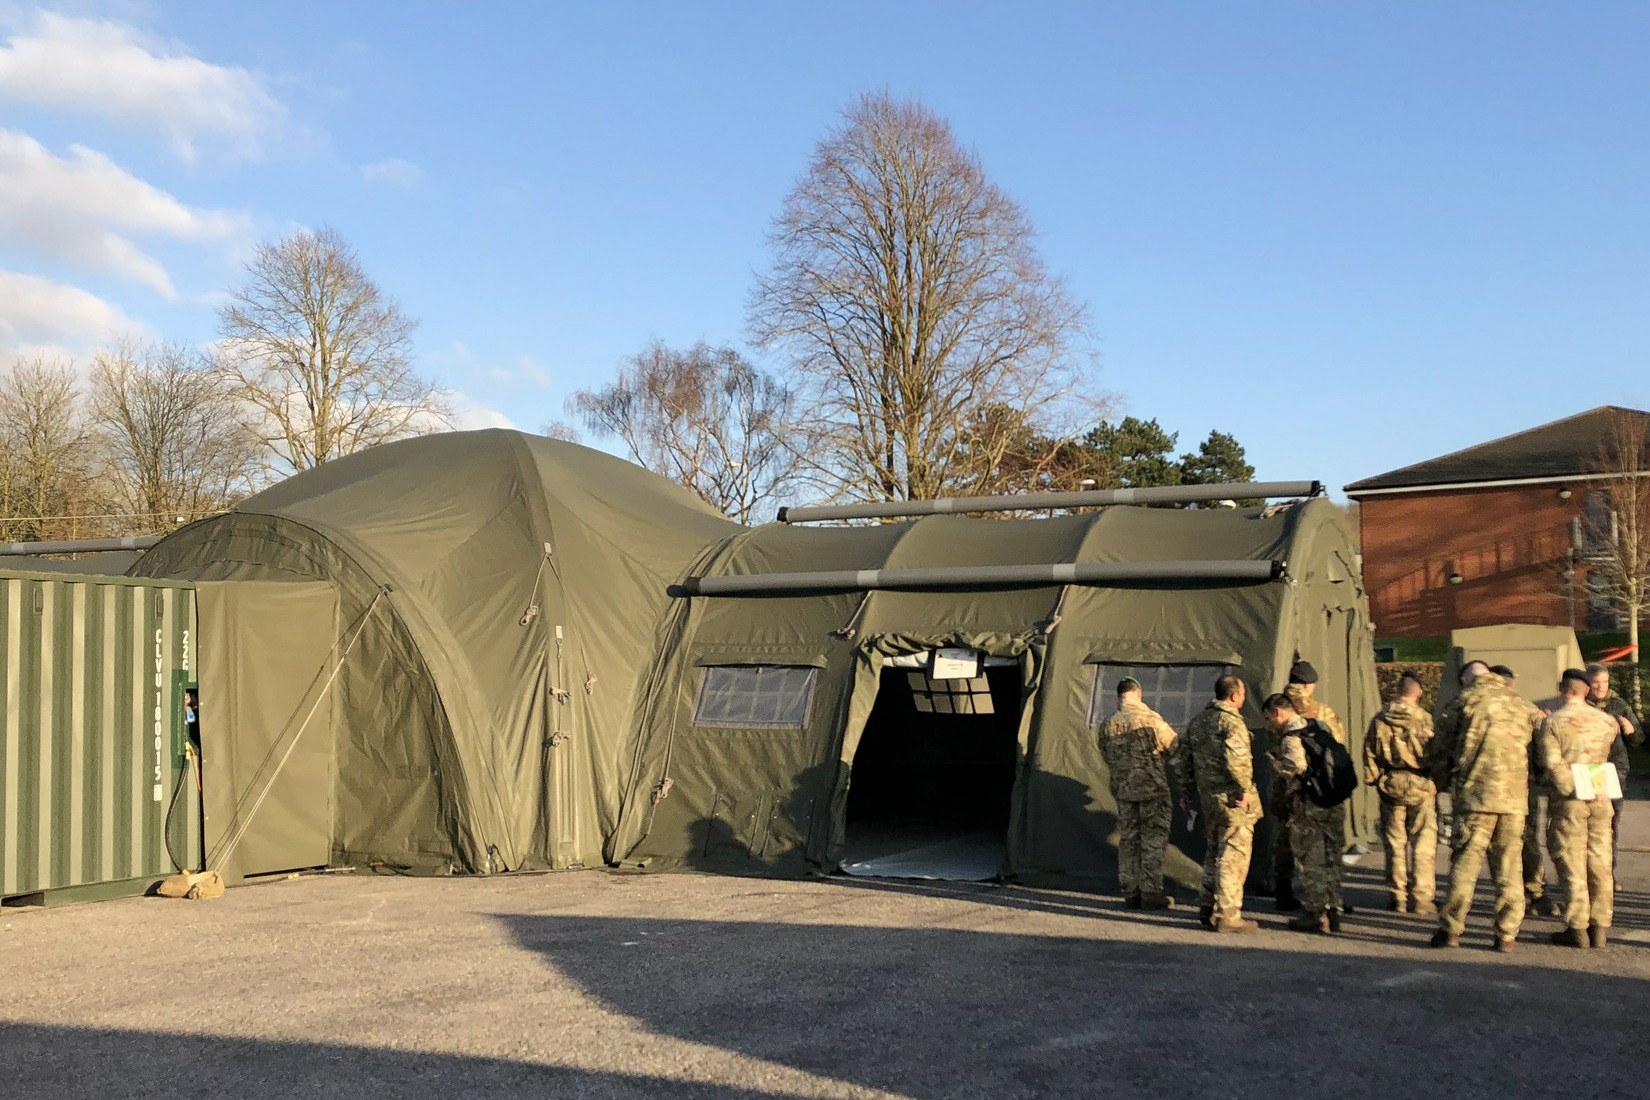 NIXUS PRO X Command Post is made up of 4 PRO tents arranged in an X shape around an interconnecting module